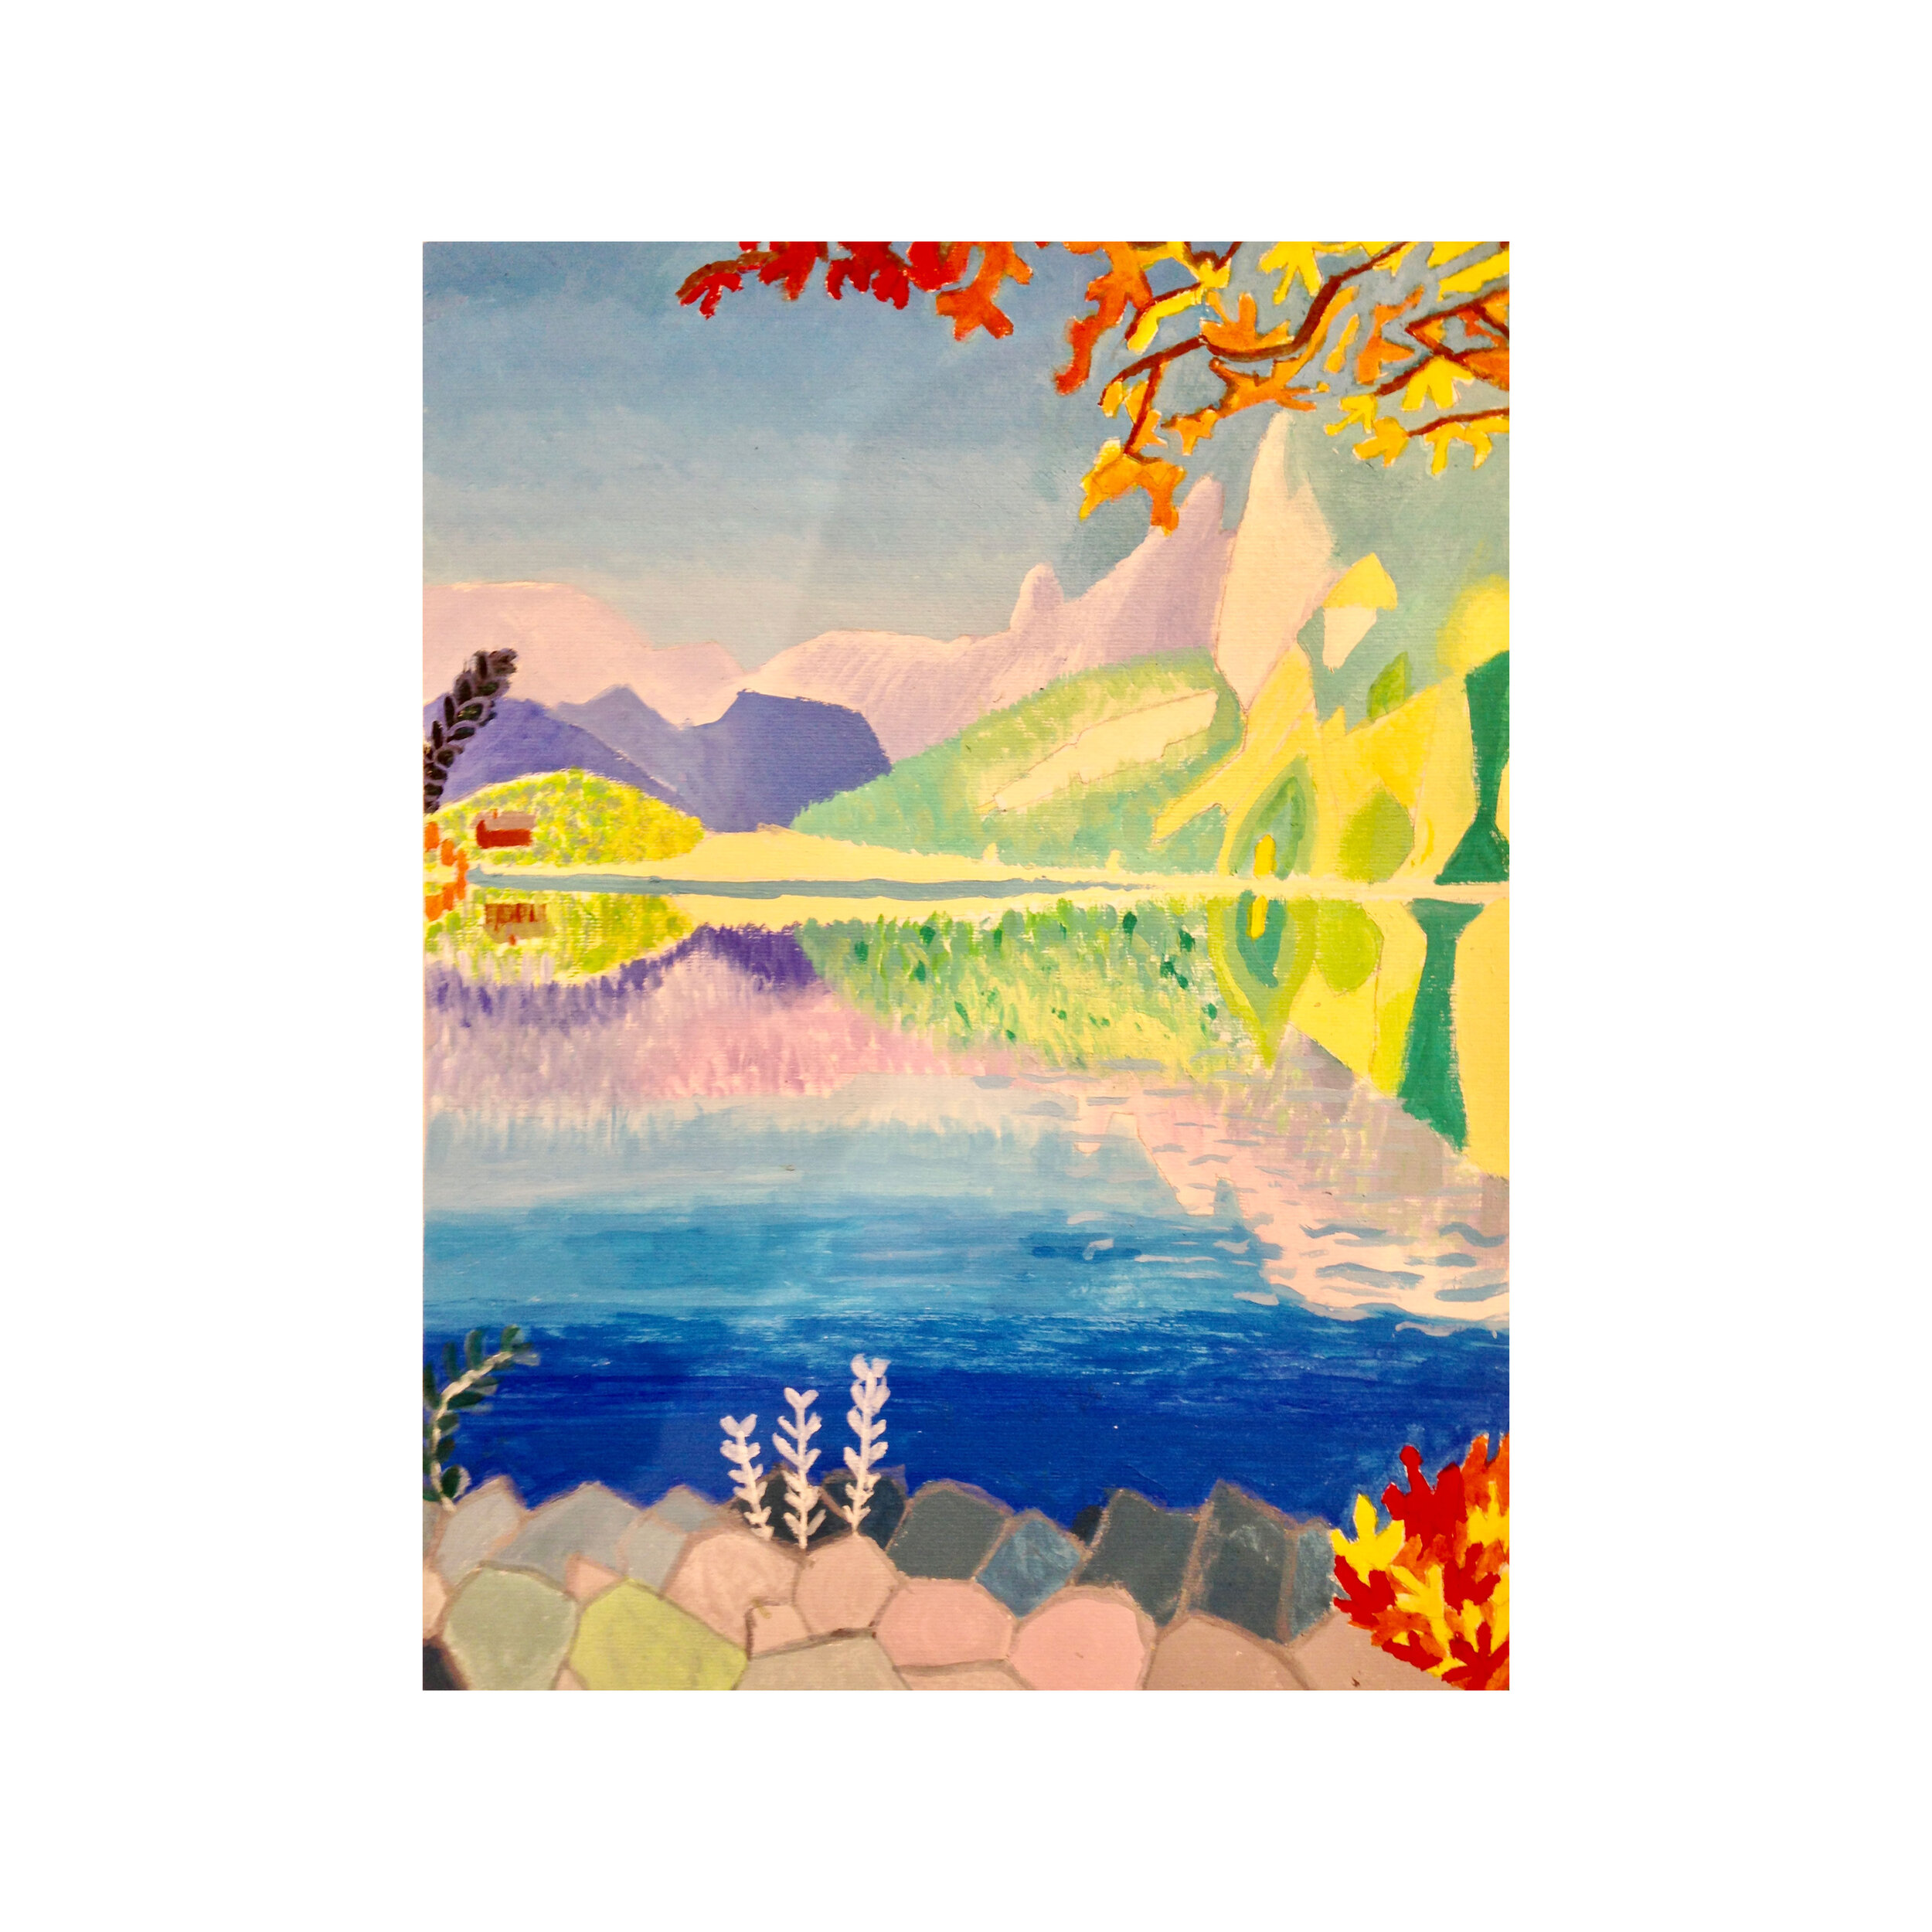 A painting of Taney lake in gouache by Leah